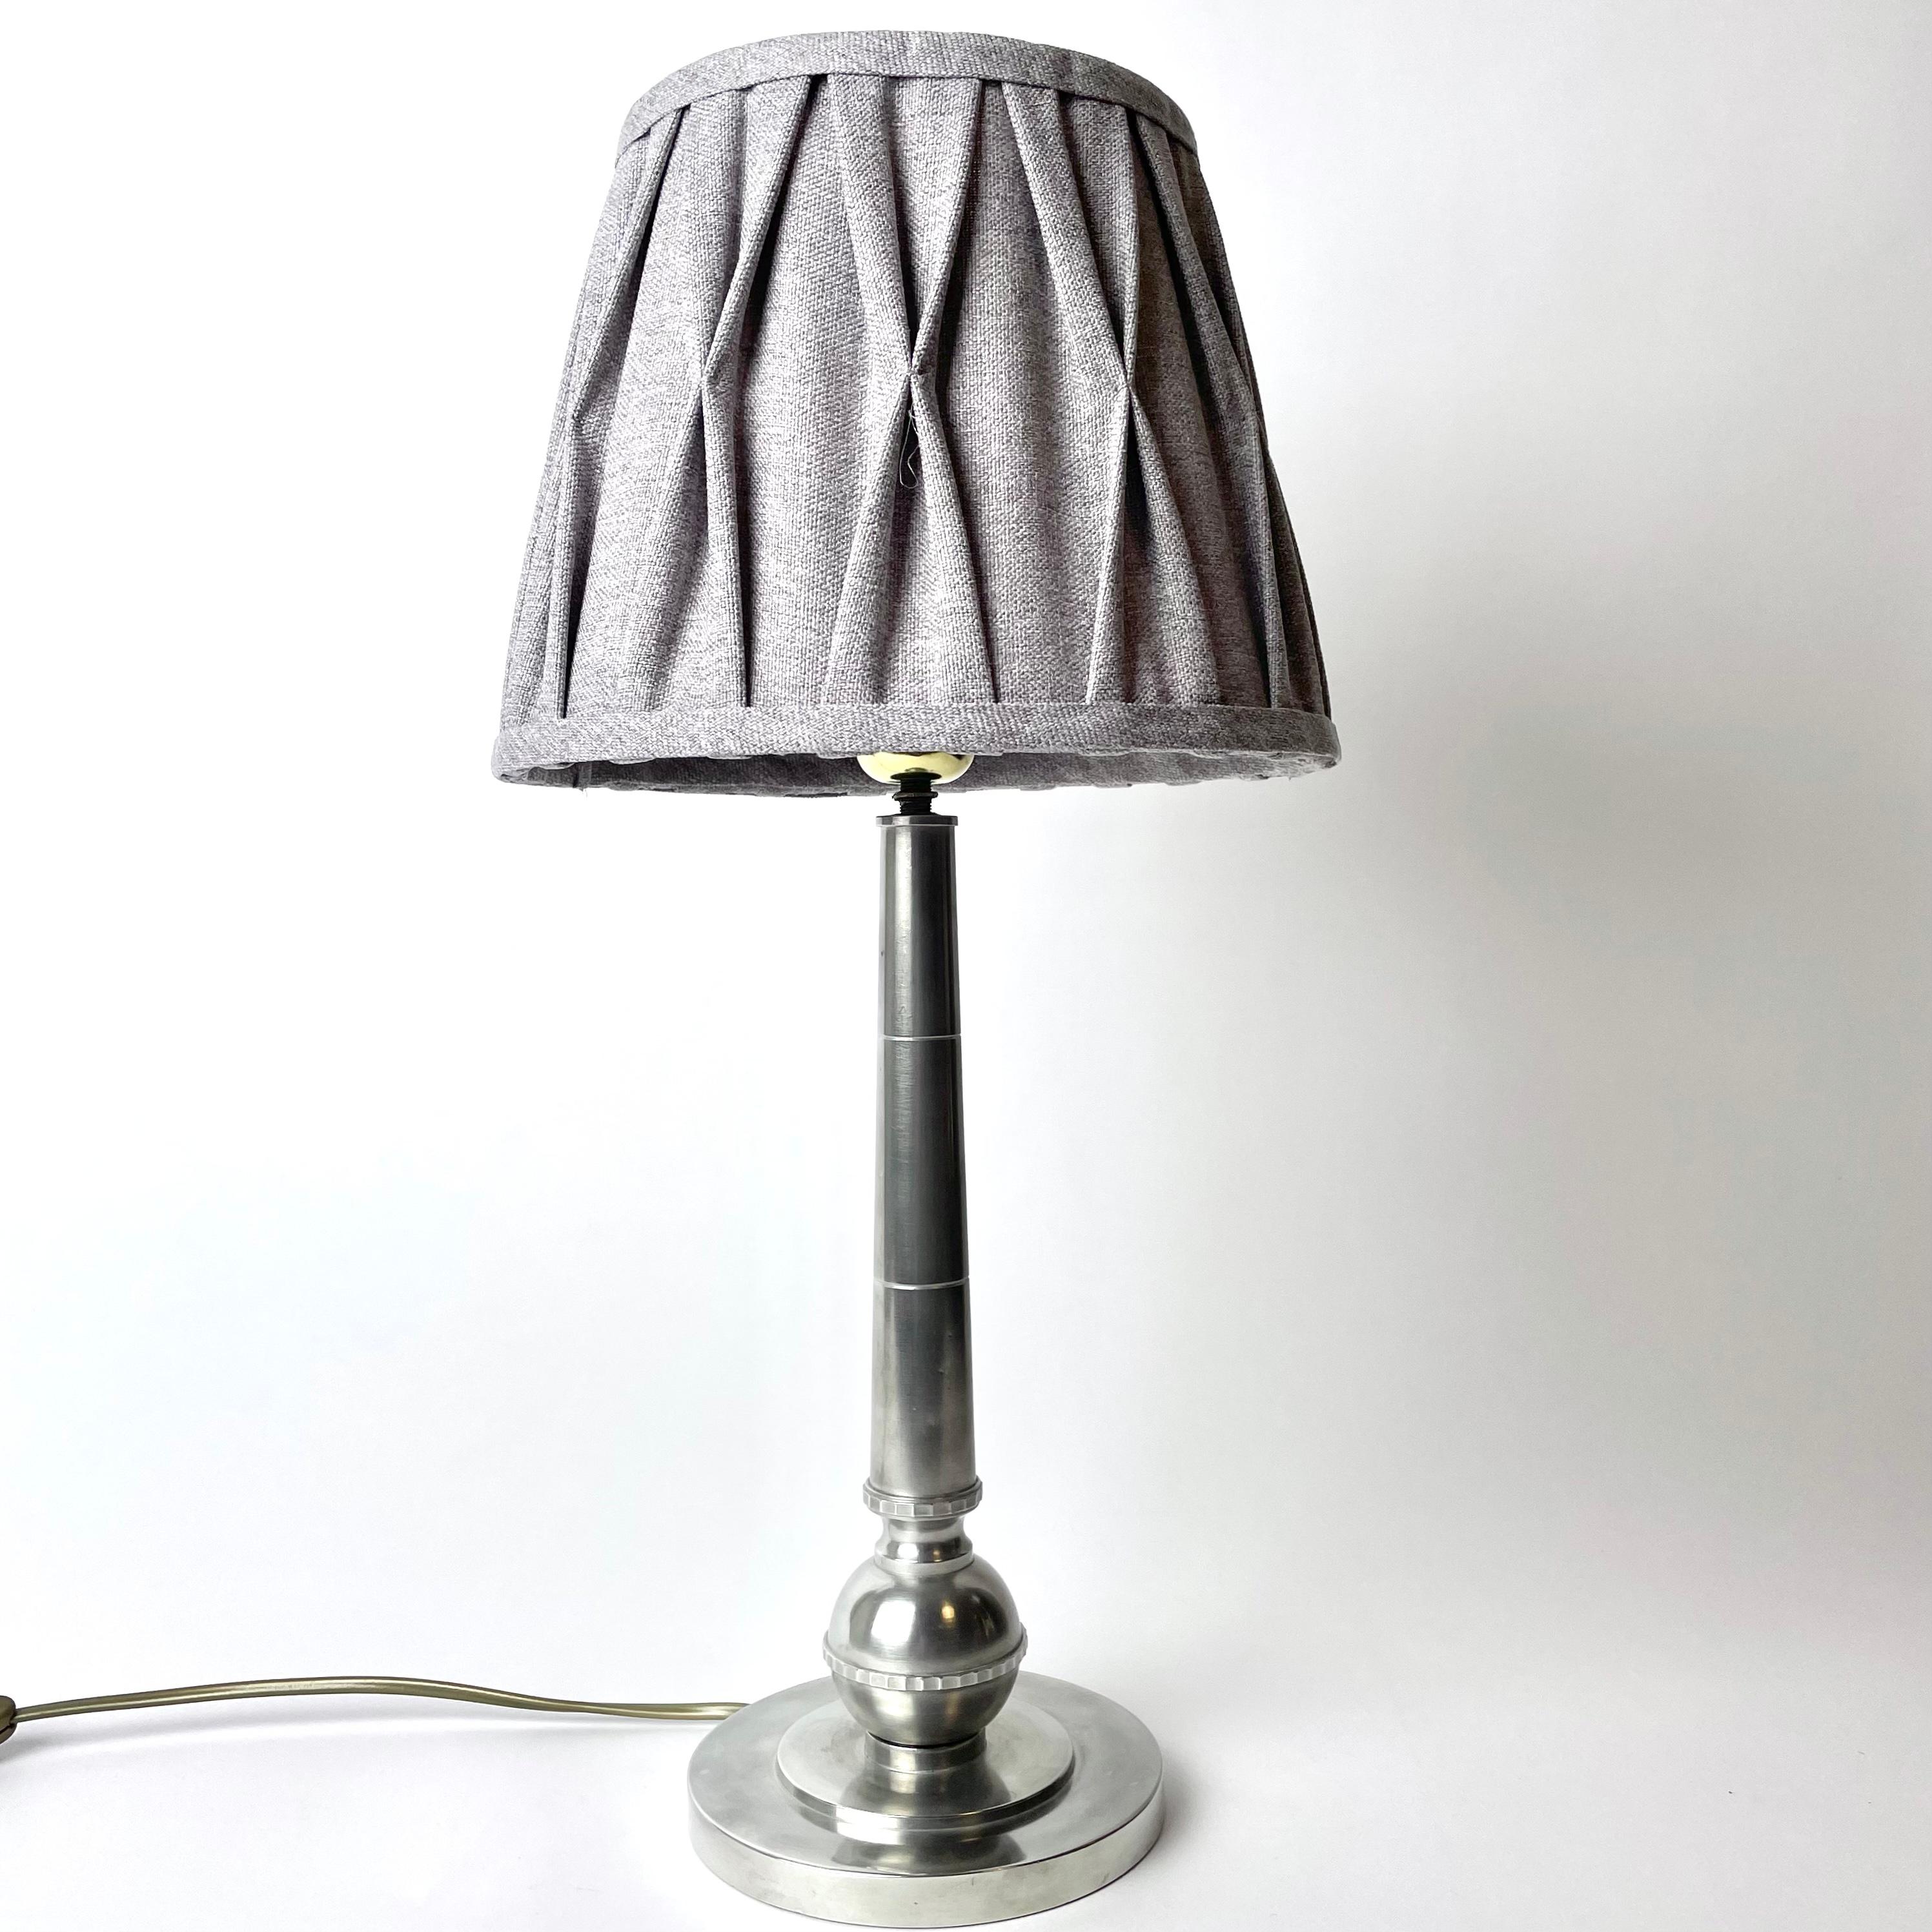 Elegant Pewter Lamp in Art Deco. Made by the famous manufacturer C.G. Hallberg, Stockholm, Sweden 1930 (D8 = year 1930). Fine and period-typical crafmanship of the pewter foot

Newly renovated electric.

Wear consistent of age and use.